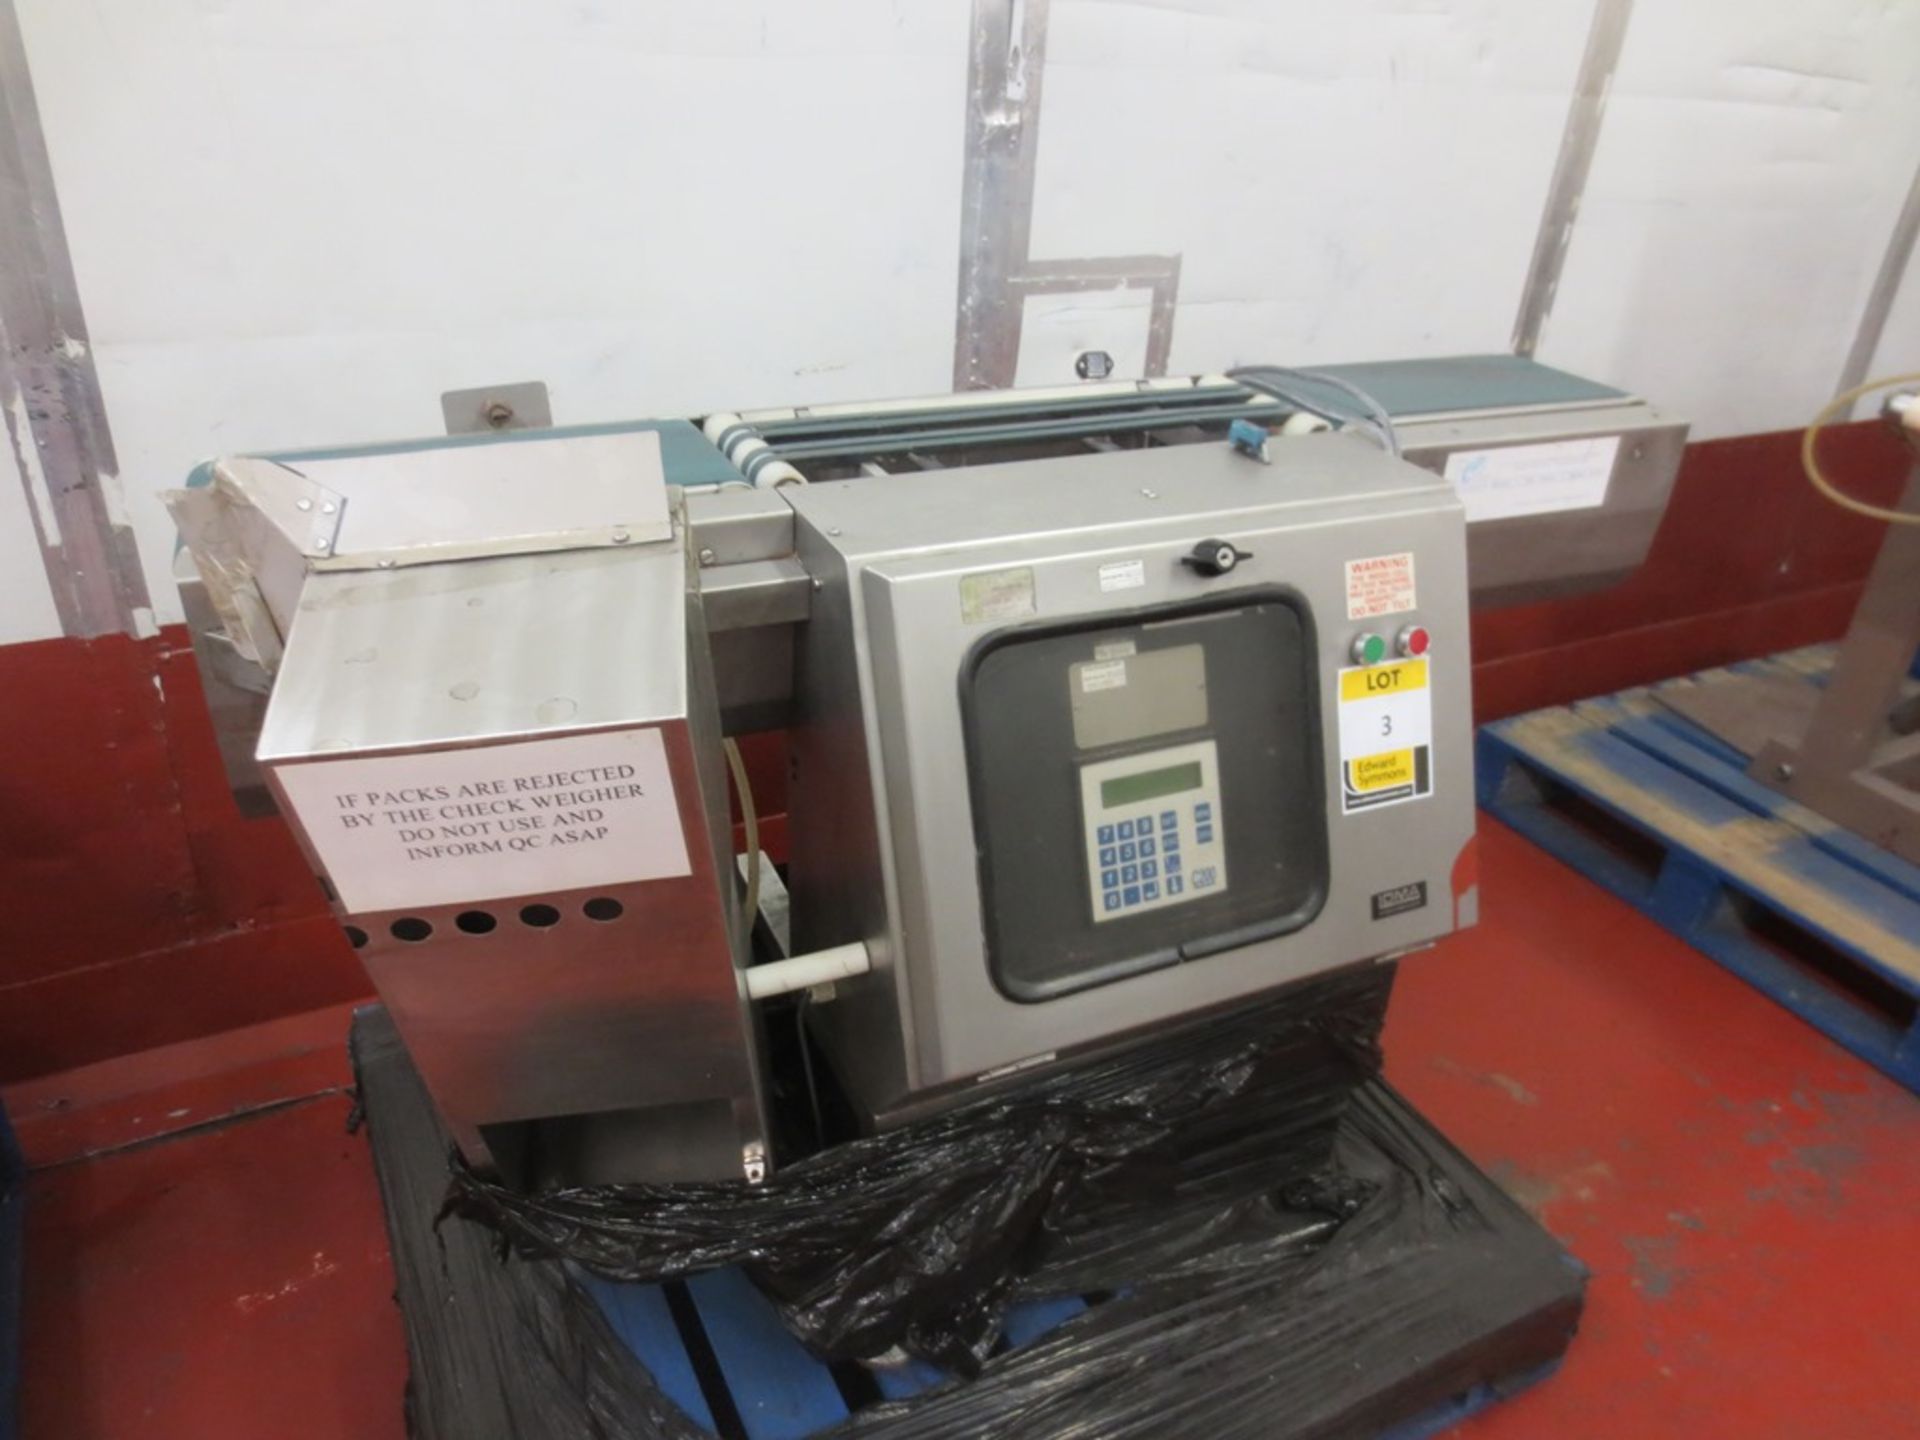 Loma systems checkweighter model C200 with pneumatic reject and digital control